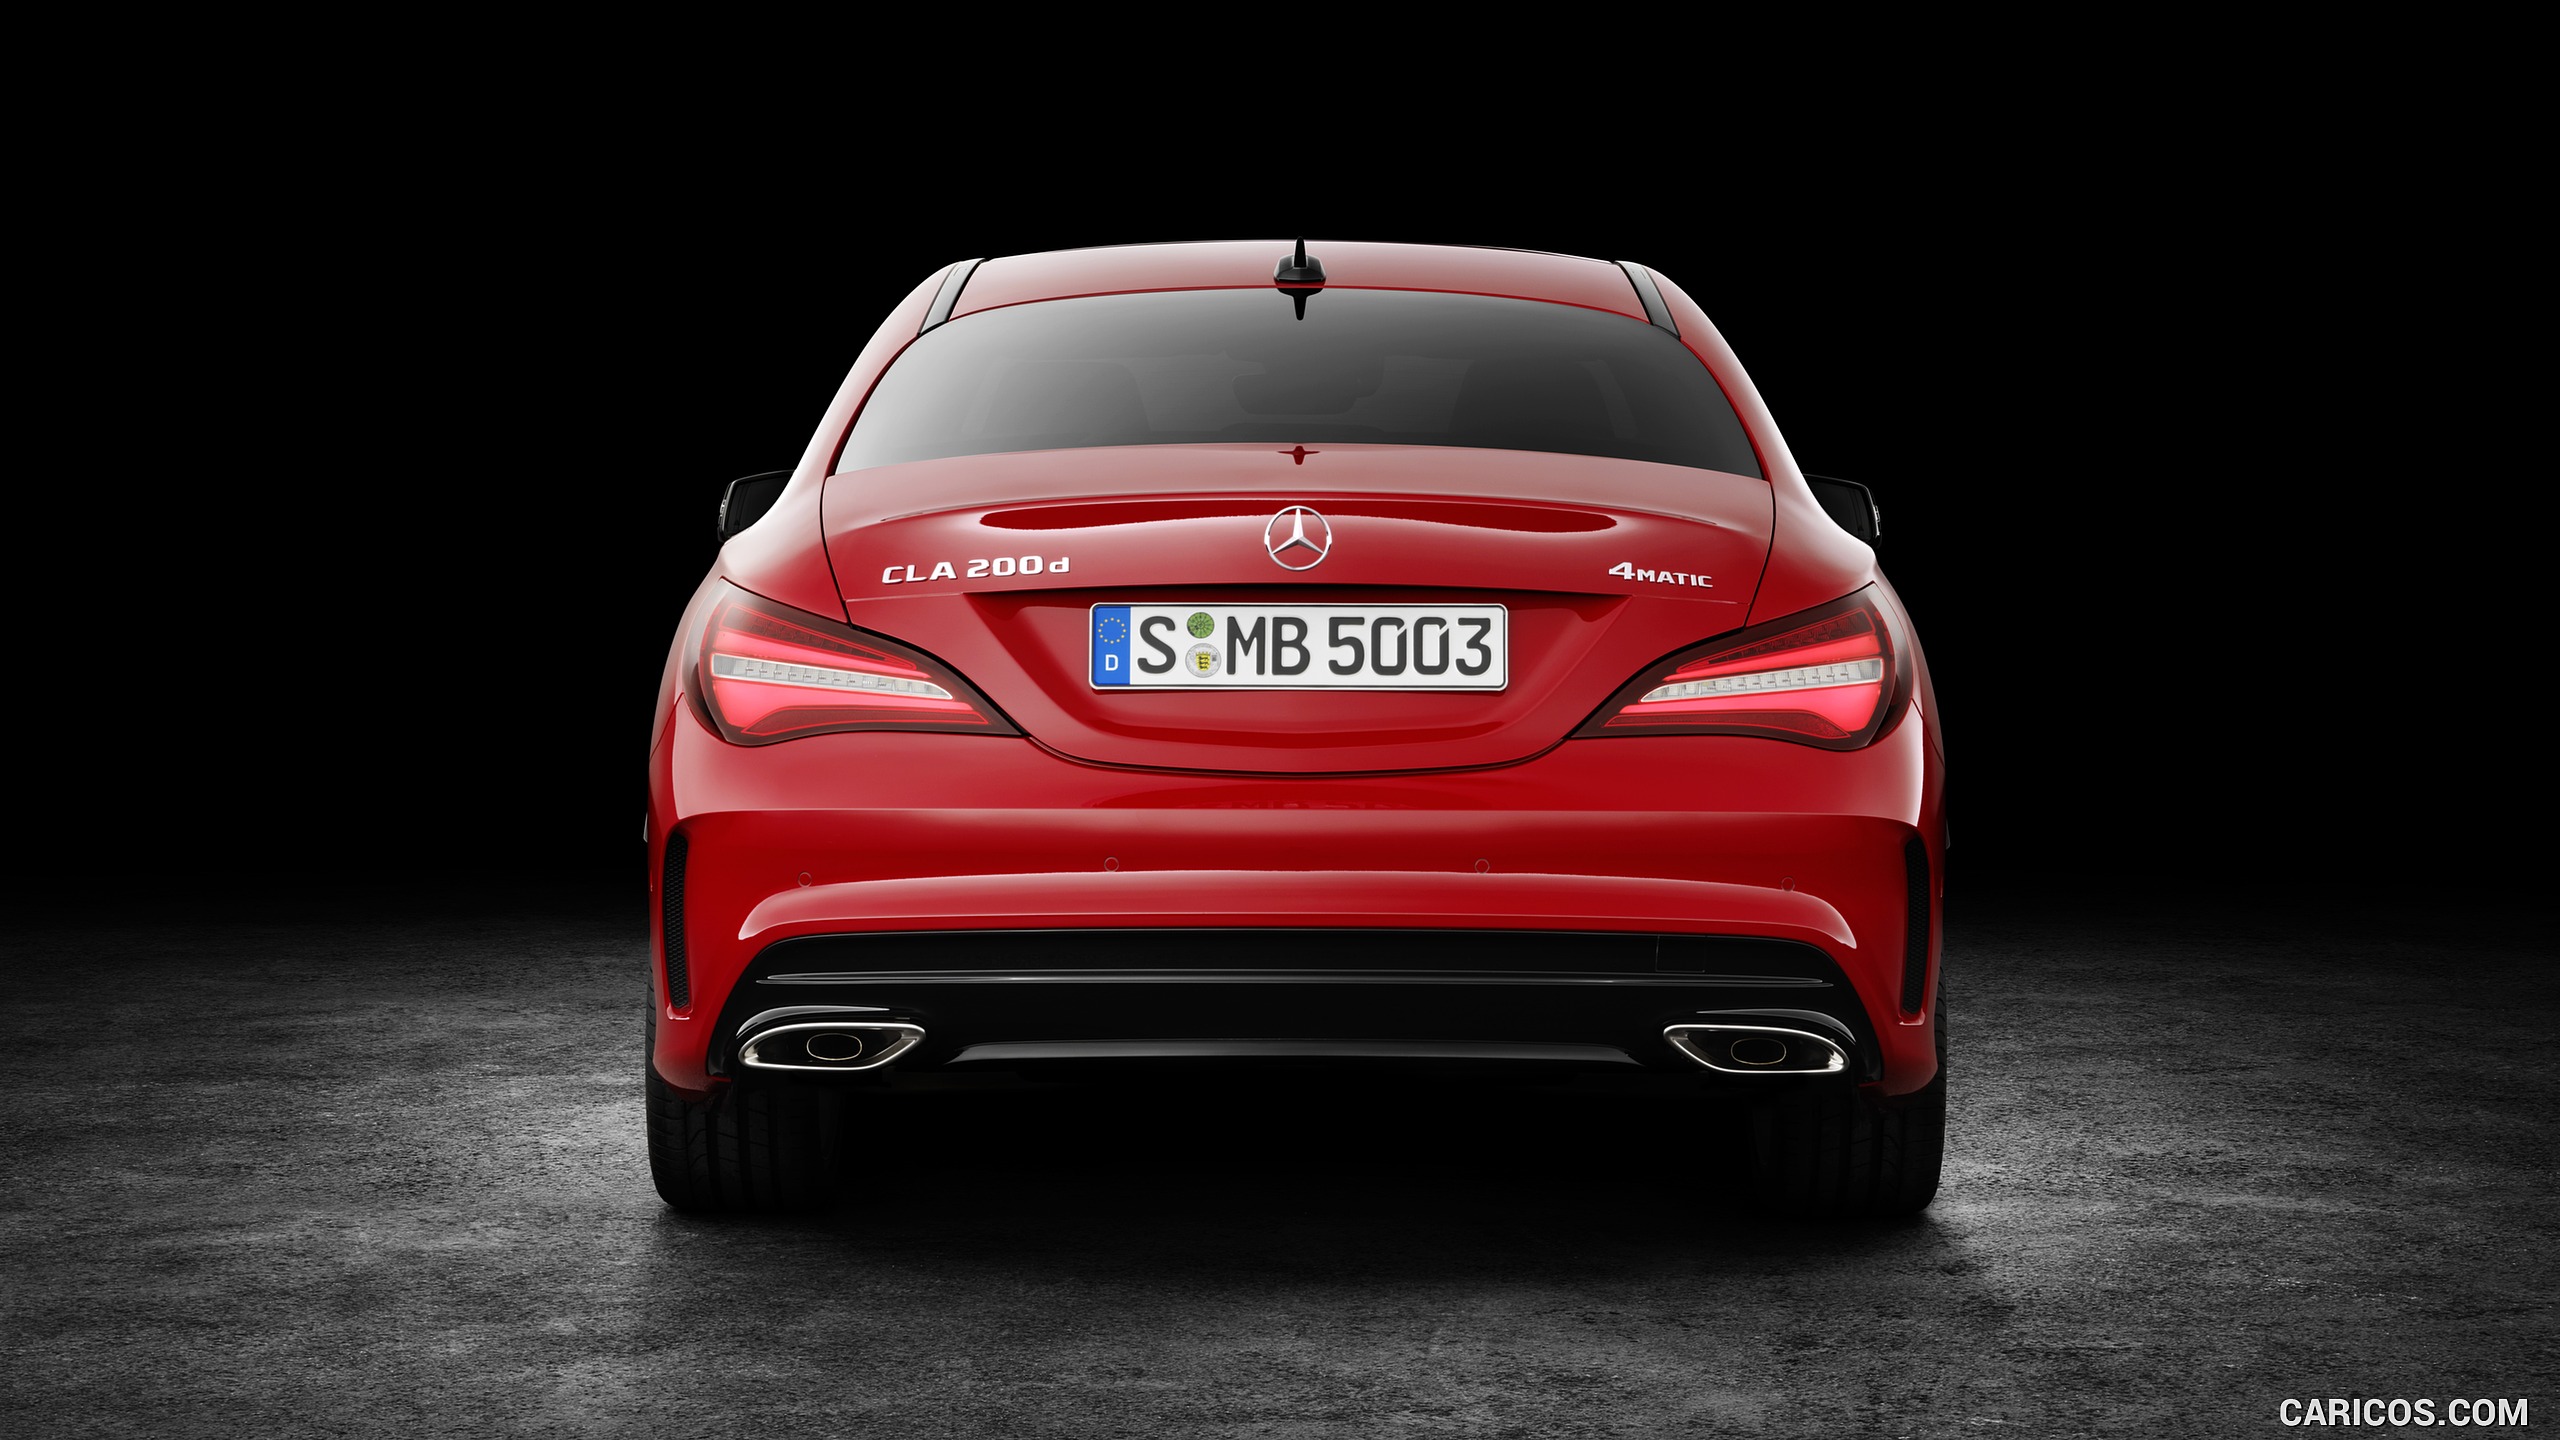 2017 Mercedes-Benz CLA 200 d 4MATIC Coupé (Chassis: C117, Color: Jupiter Red) - Rear, #5 of 7